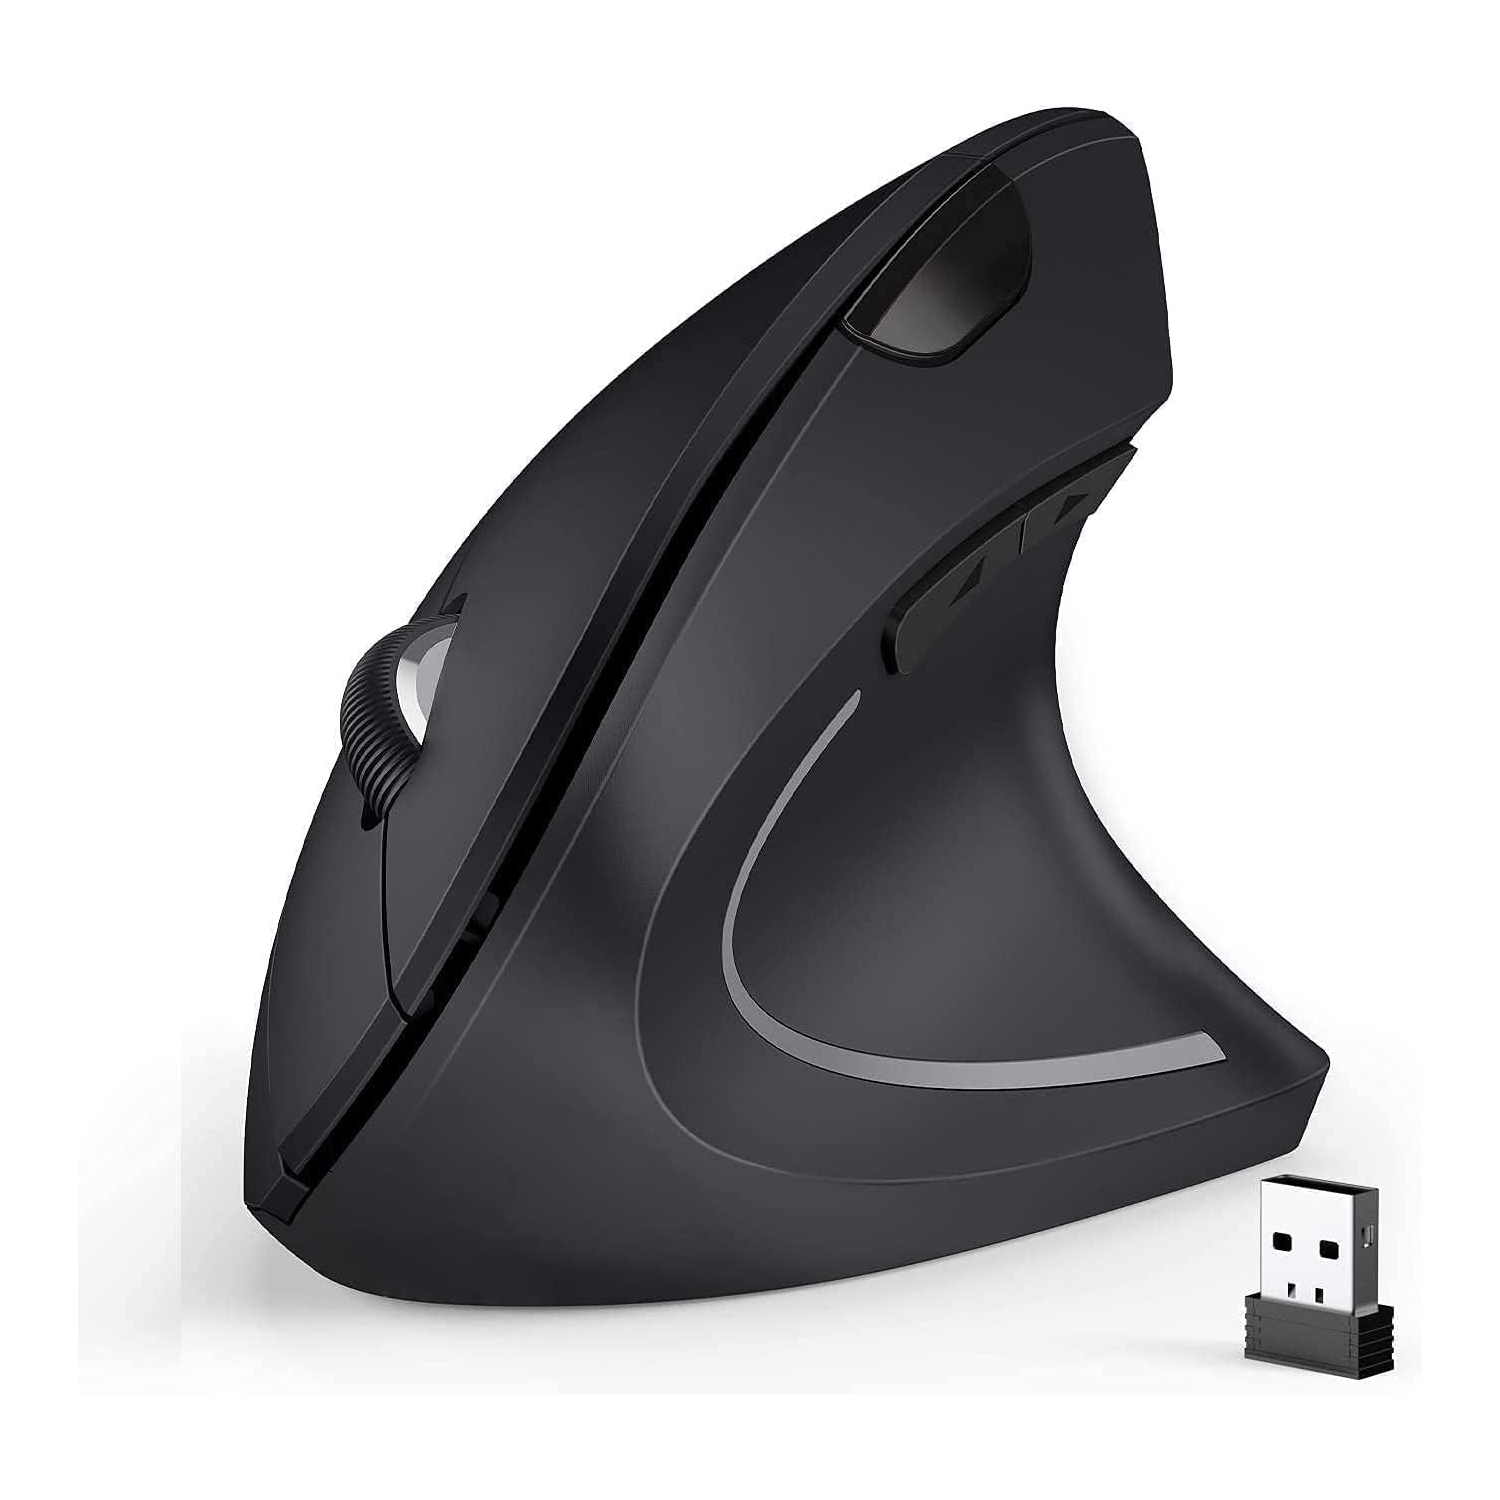 Ergonomic Mouse, 2.4G Optical Wireless Vertical Mouse with 6 Buttons - 3 Adjustable DPI 800/1200/1600 for Laptop, PC, Computer, Desktop, Notebook etc, Specially for Right-handers